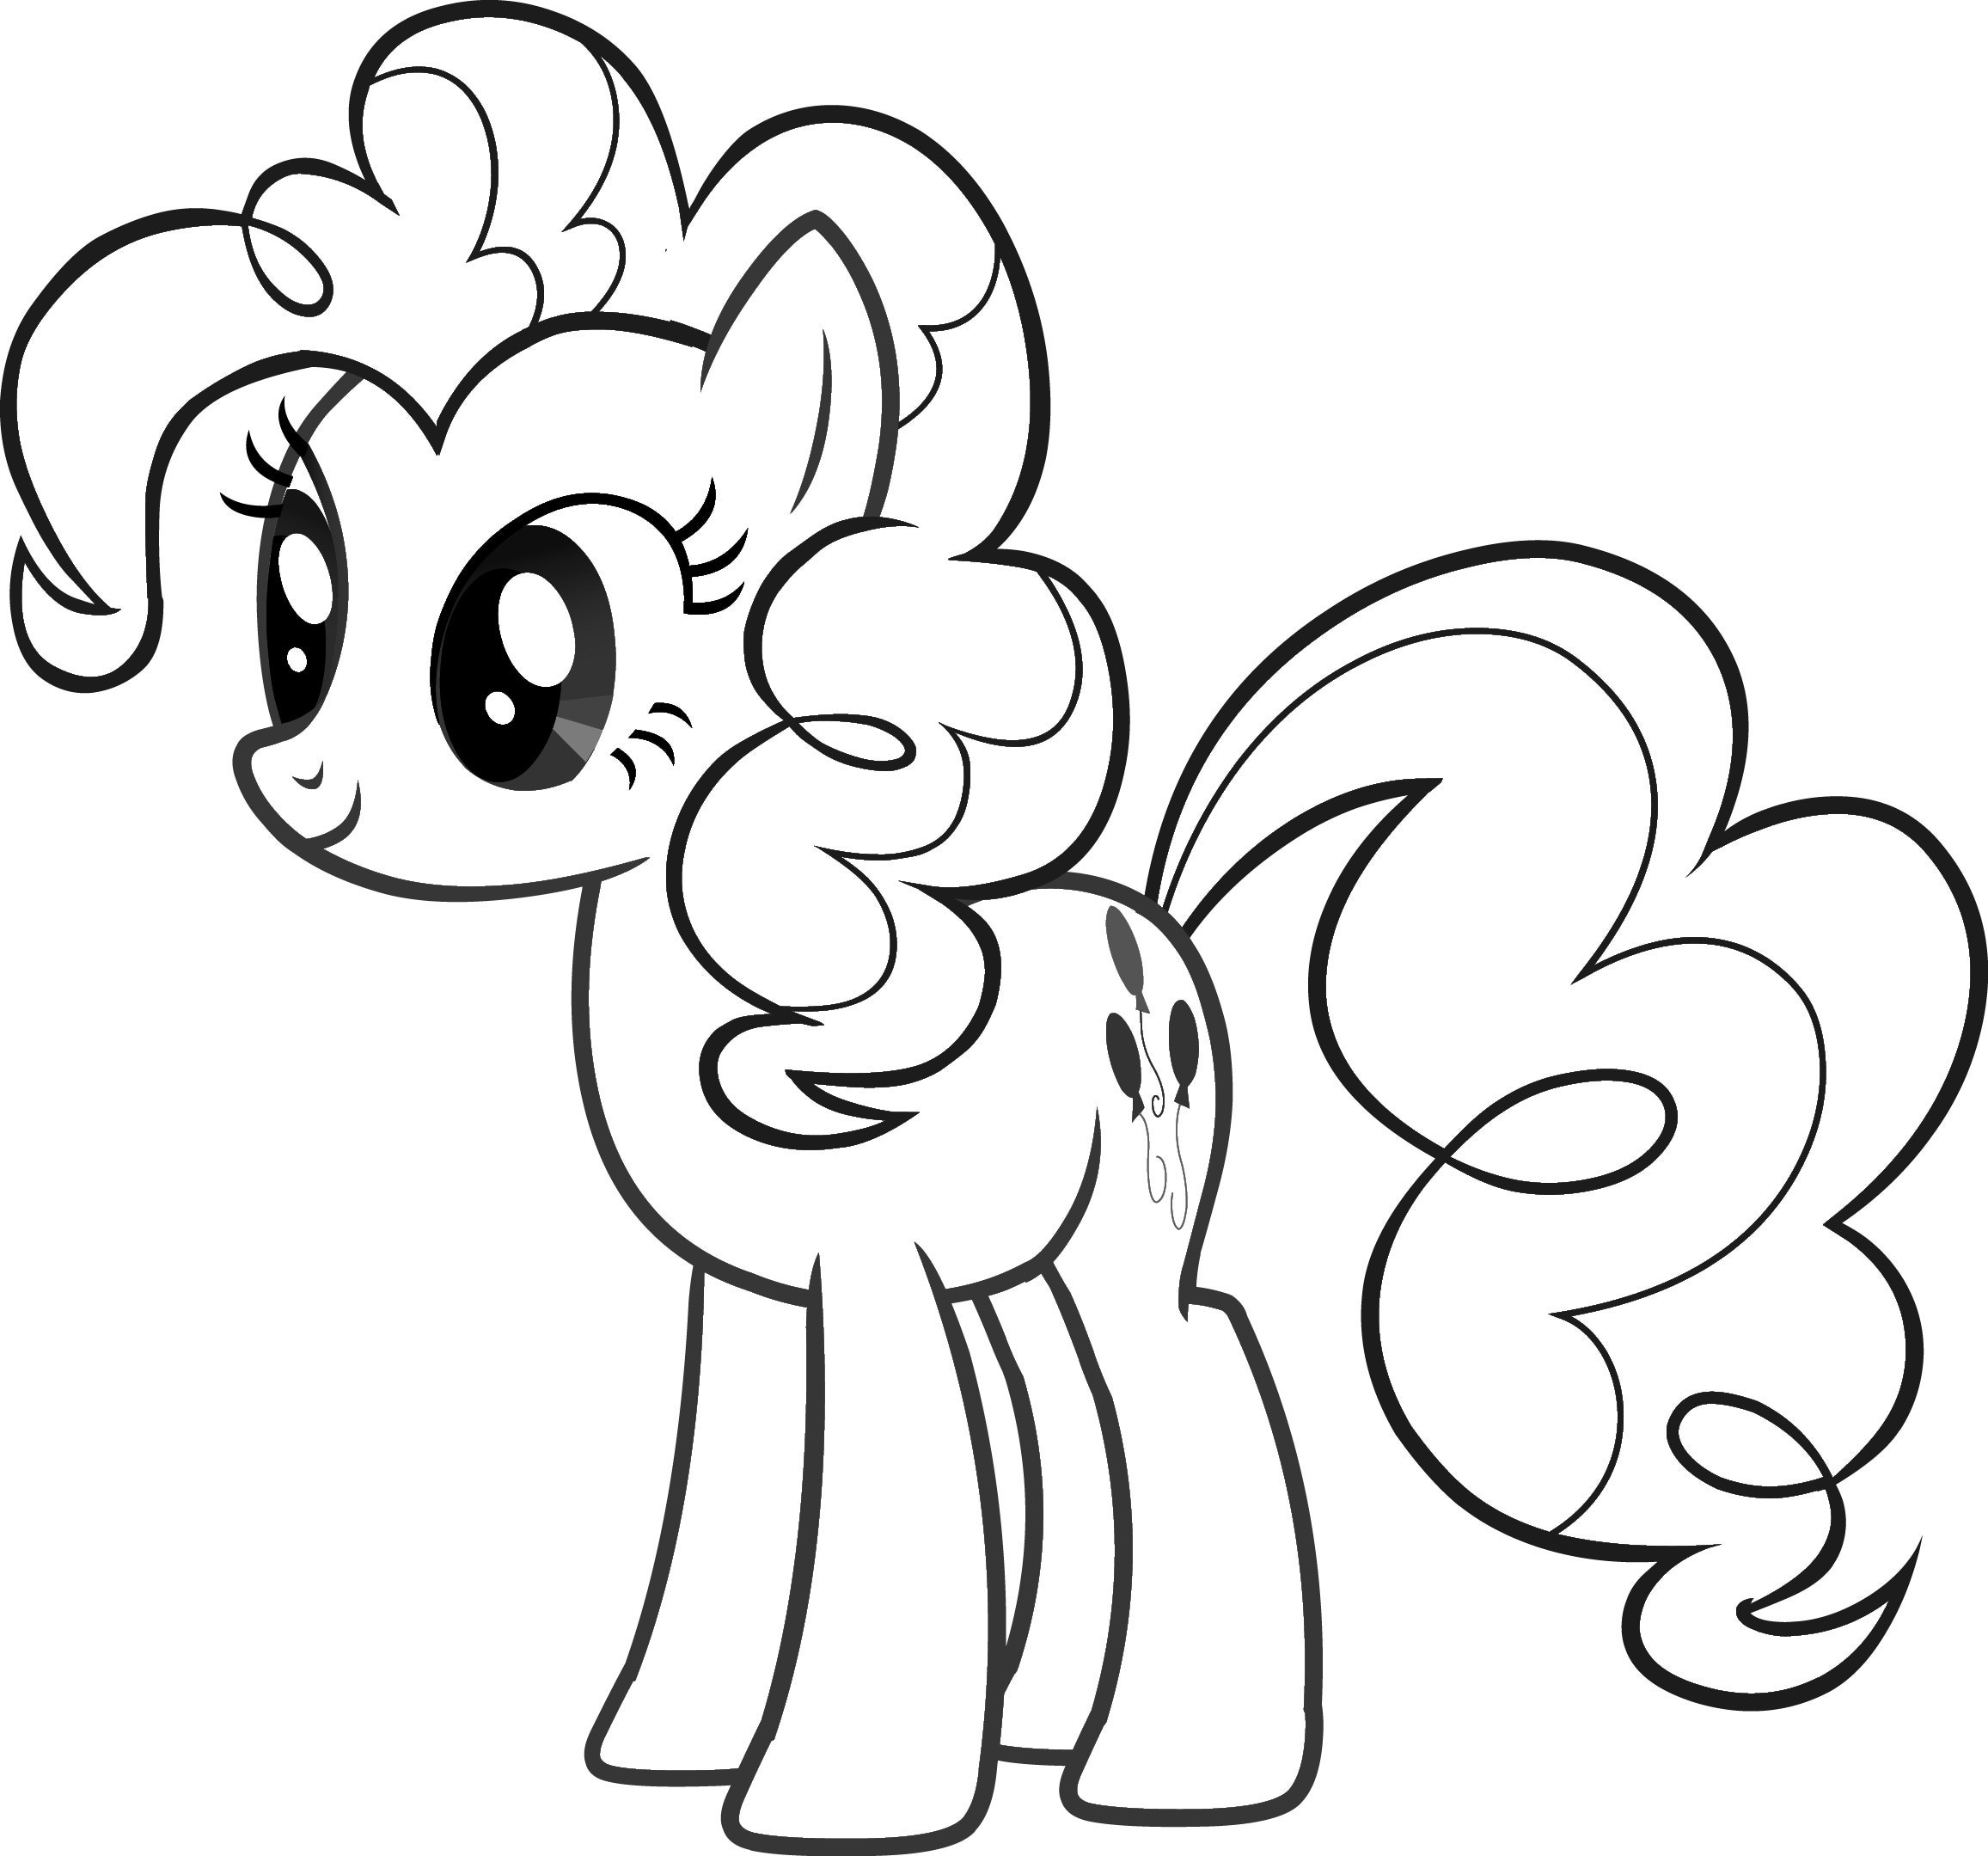 Online Coloring Pages Girls
 My little pony coloring pages